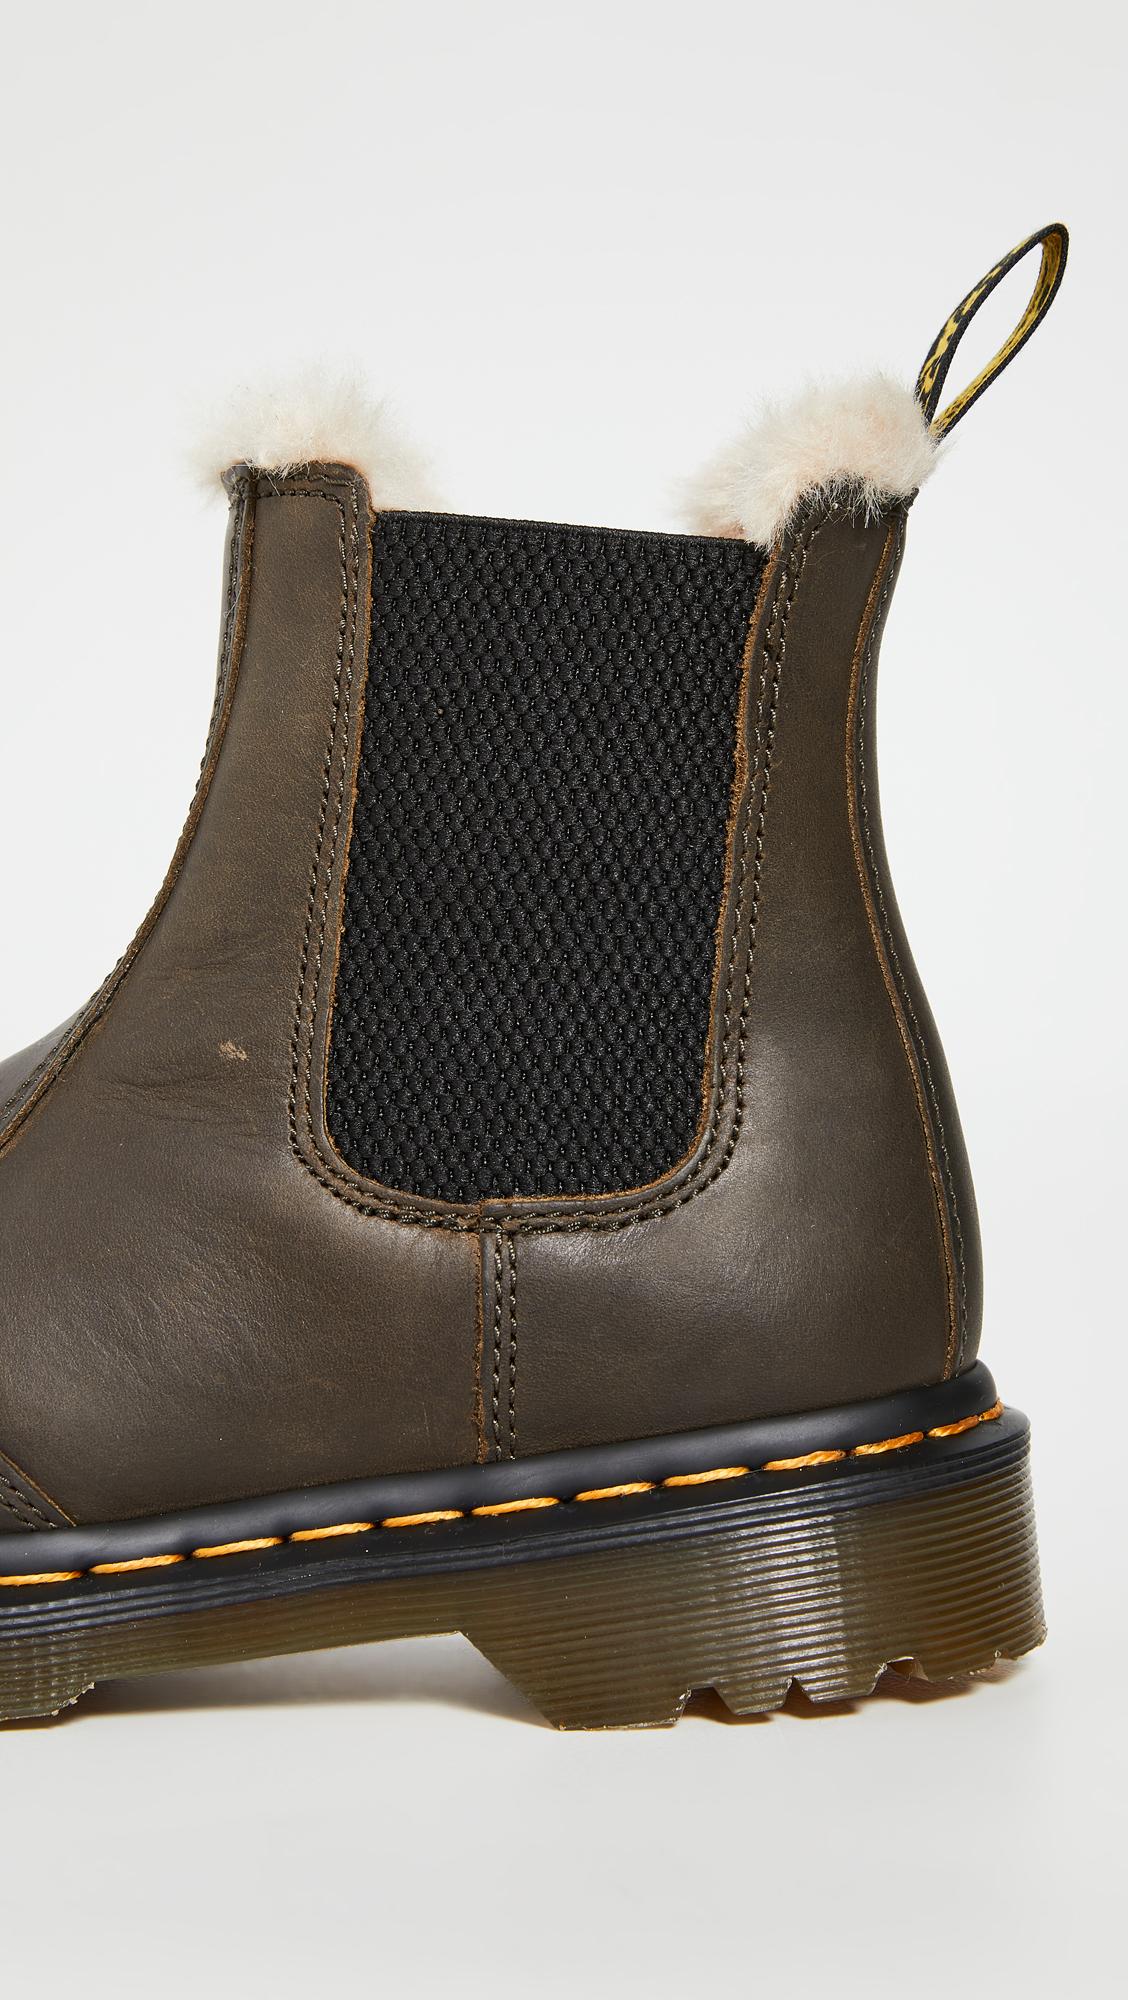 Dr. Martens 2976 Leonore Chelsea Boots in Green | Lyst